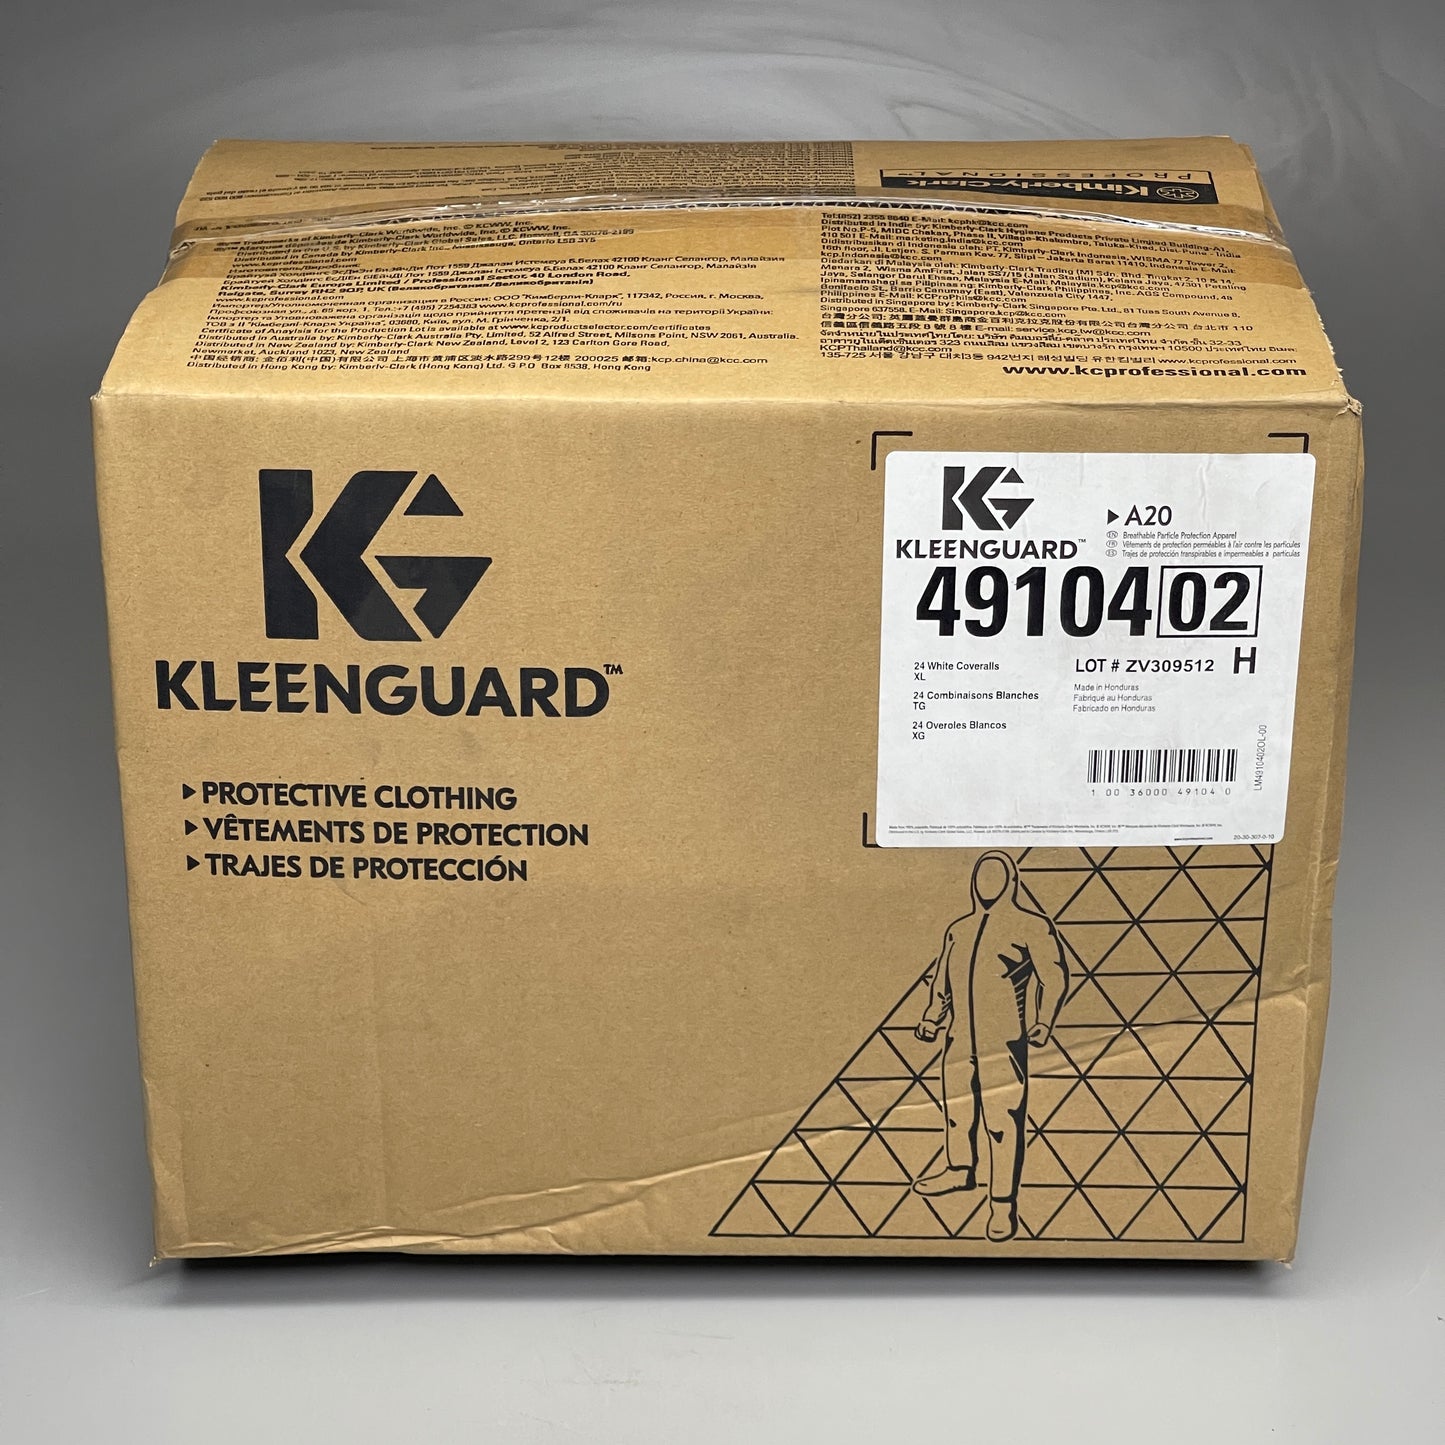 KLEENGUARD Box Of 24 A20 Coveralls Protective Clothing Zip Front Elastic XL White 49104(02) (New)